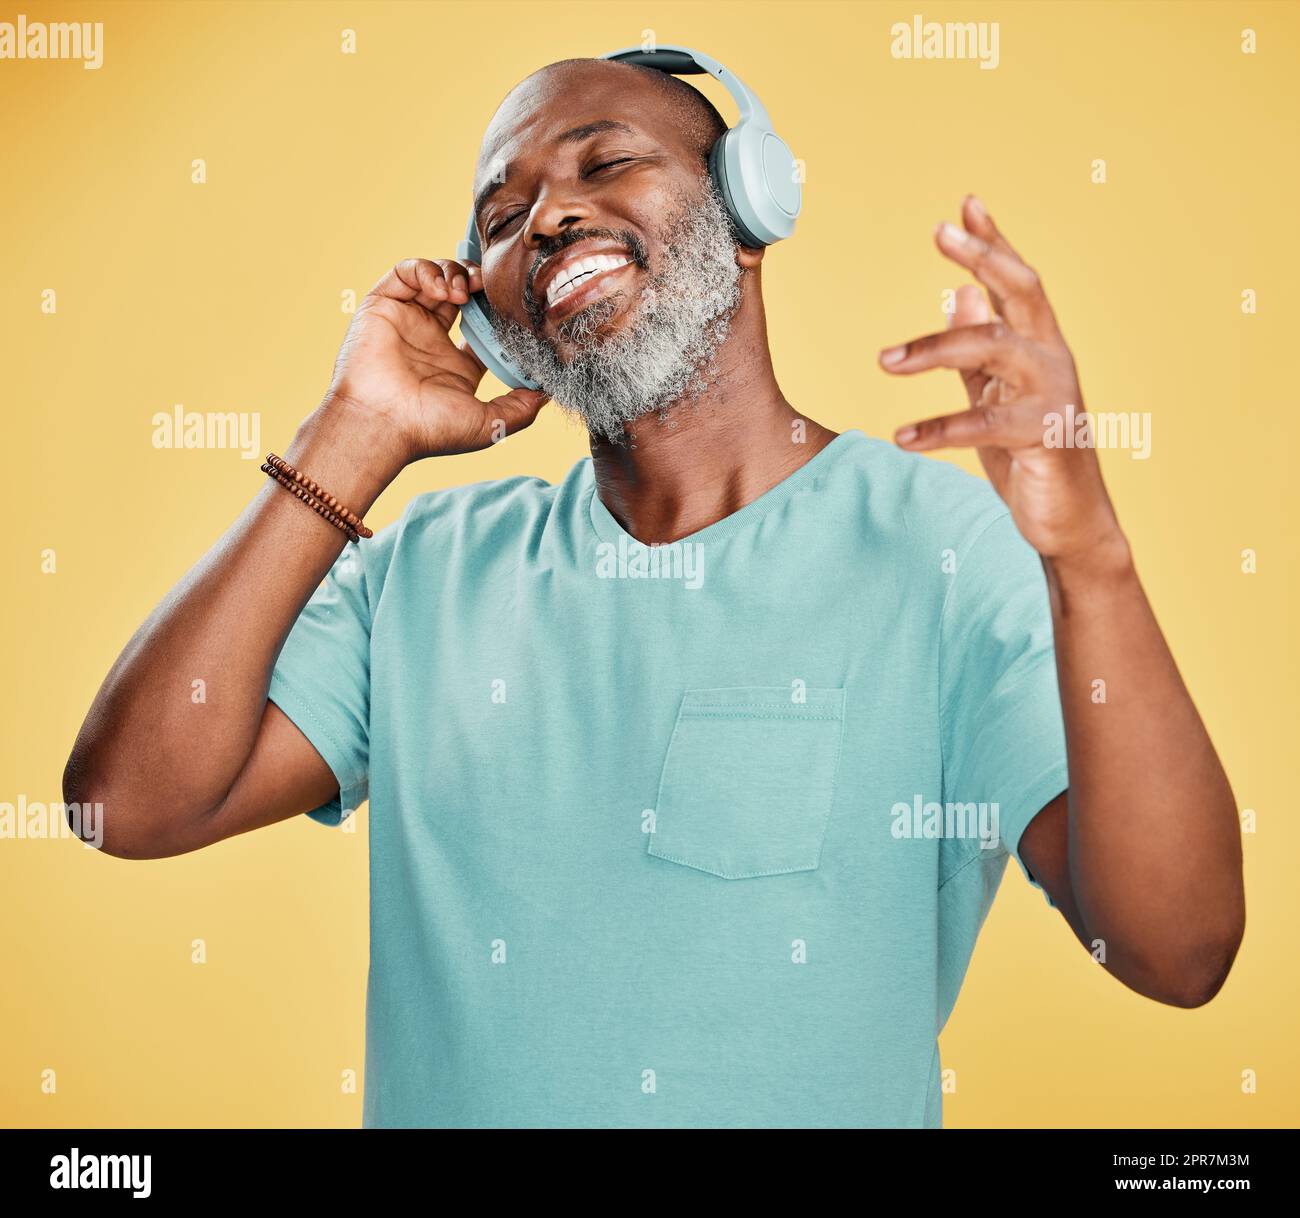 One happy mature African American man wearing headphones and listening to music while dancing against a yellow background in the studio. Smiling black man feeling free while expressing through dance Stock Photo